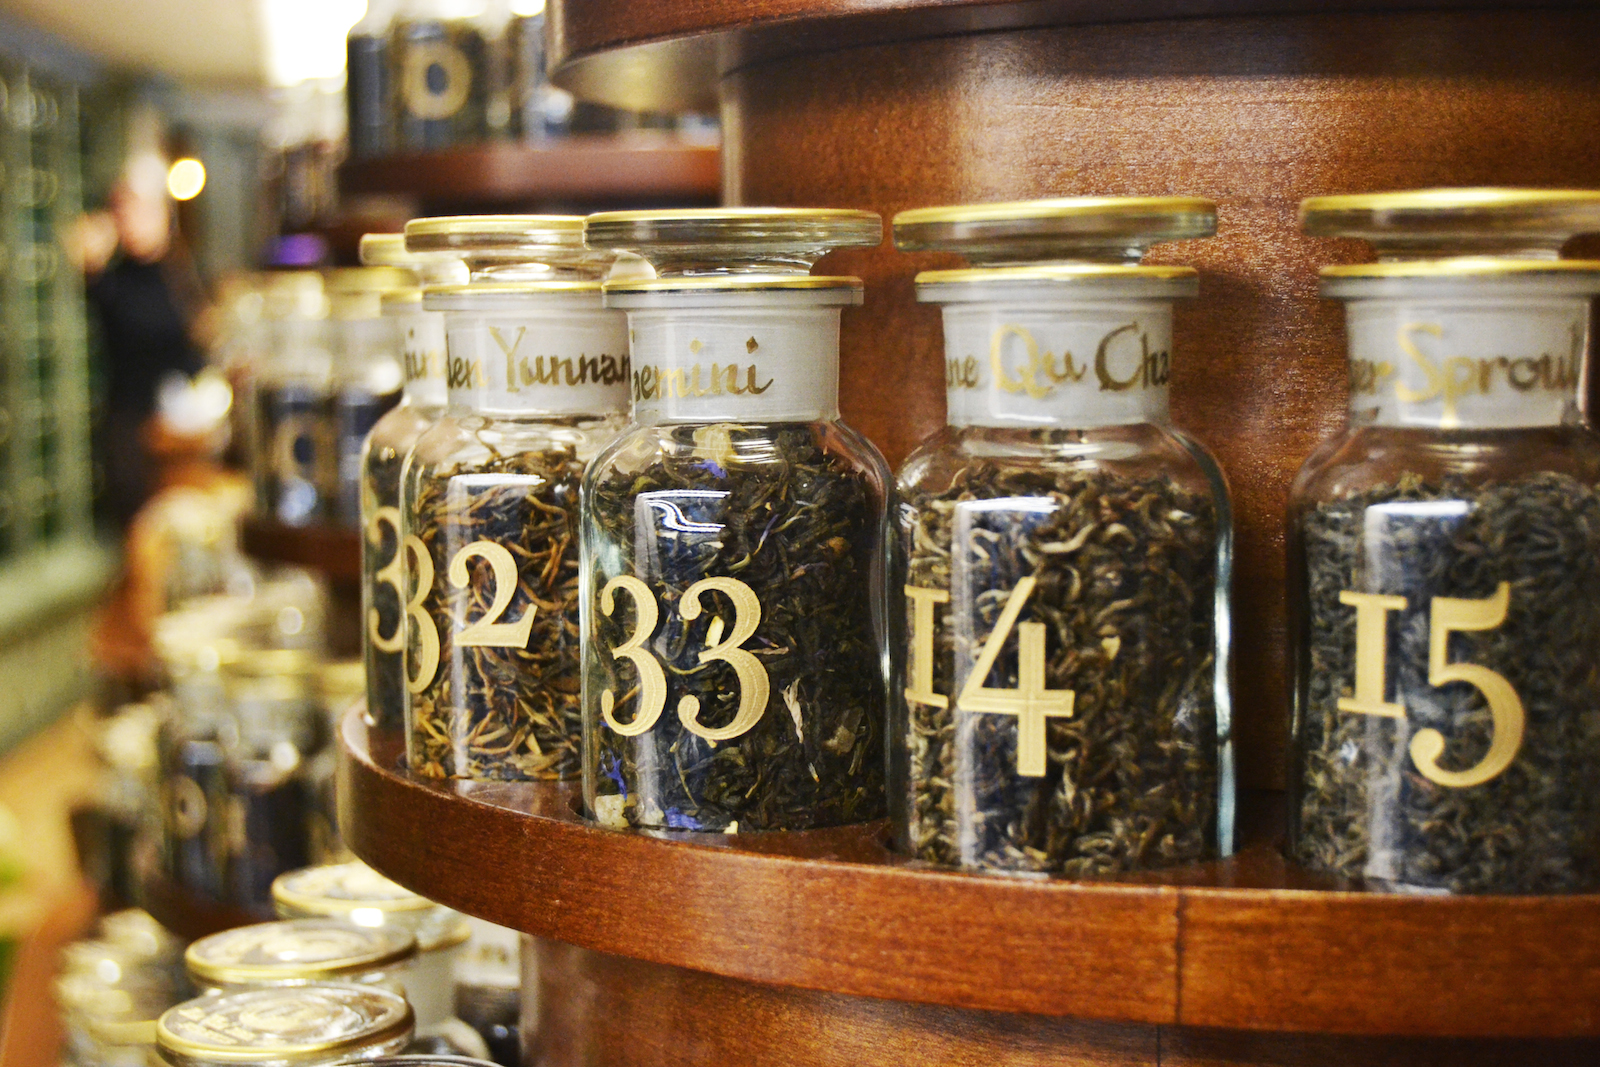 In Milan, in Brera, a new shelter for tea lovers